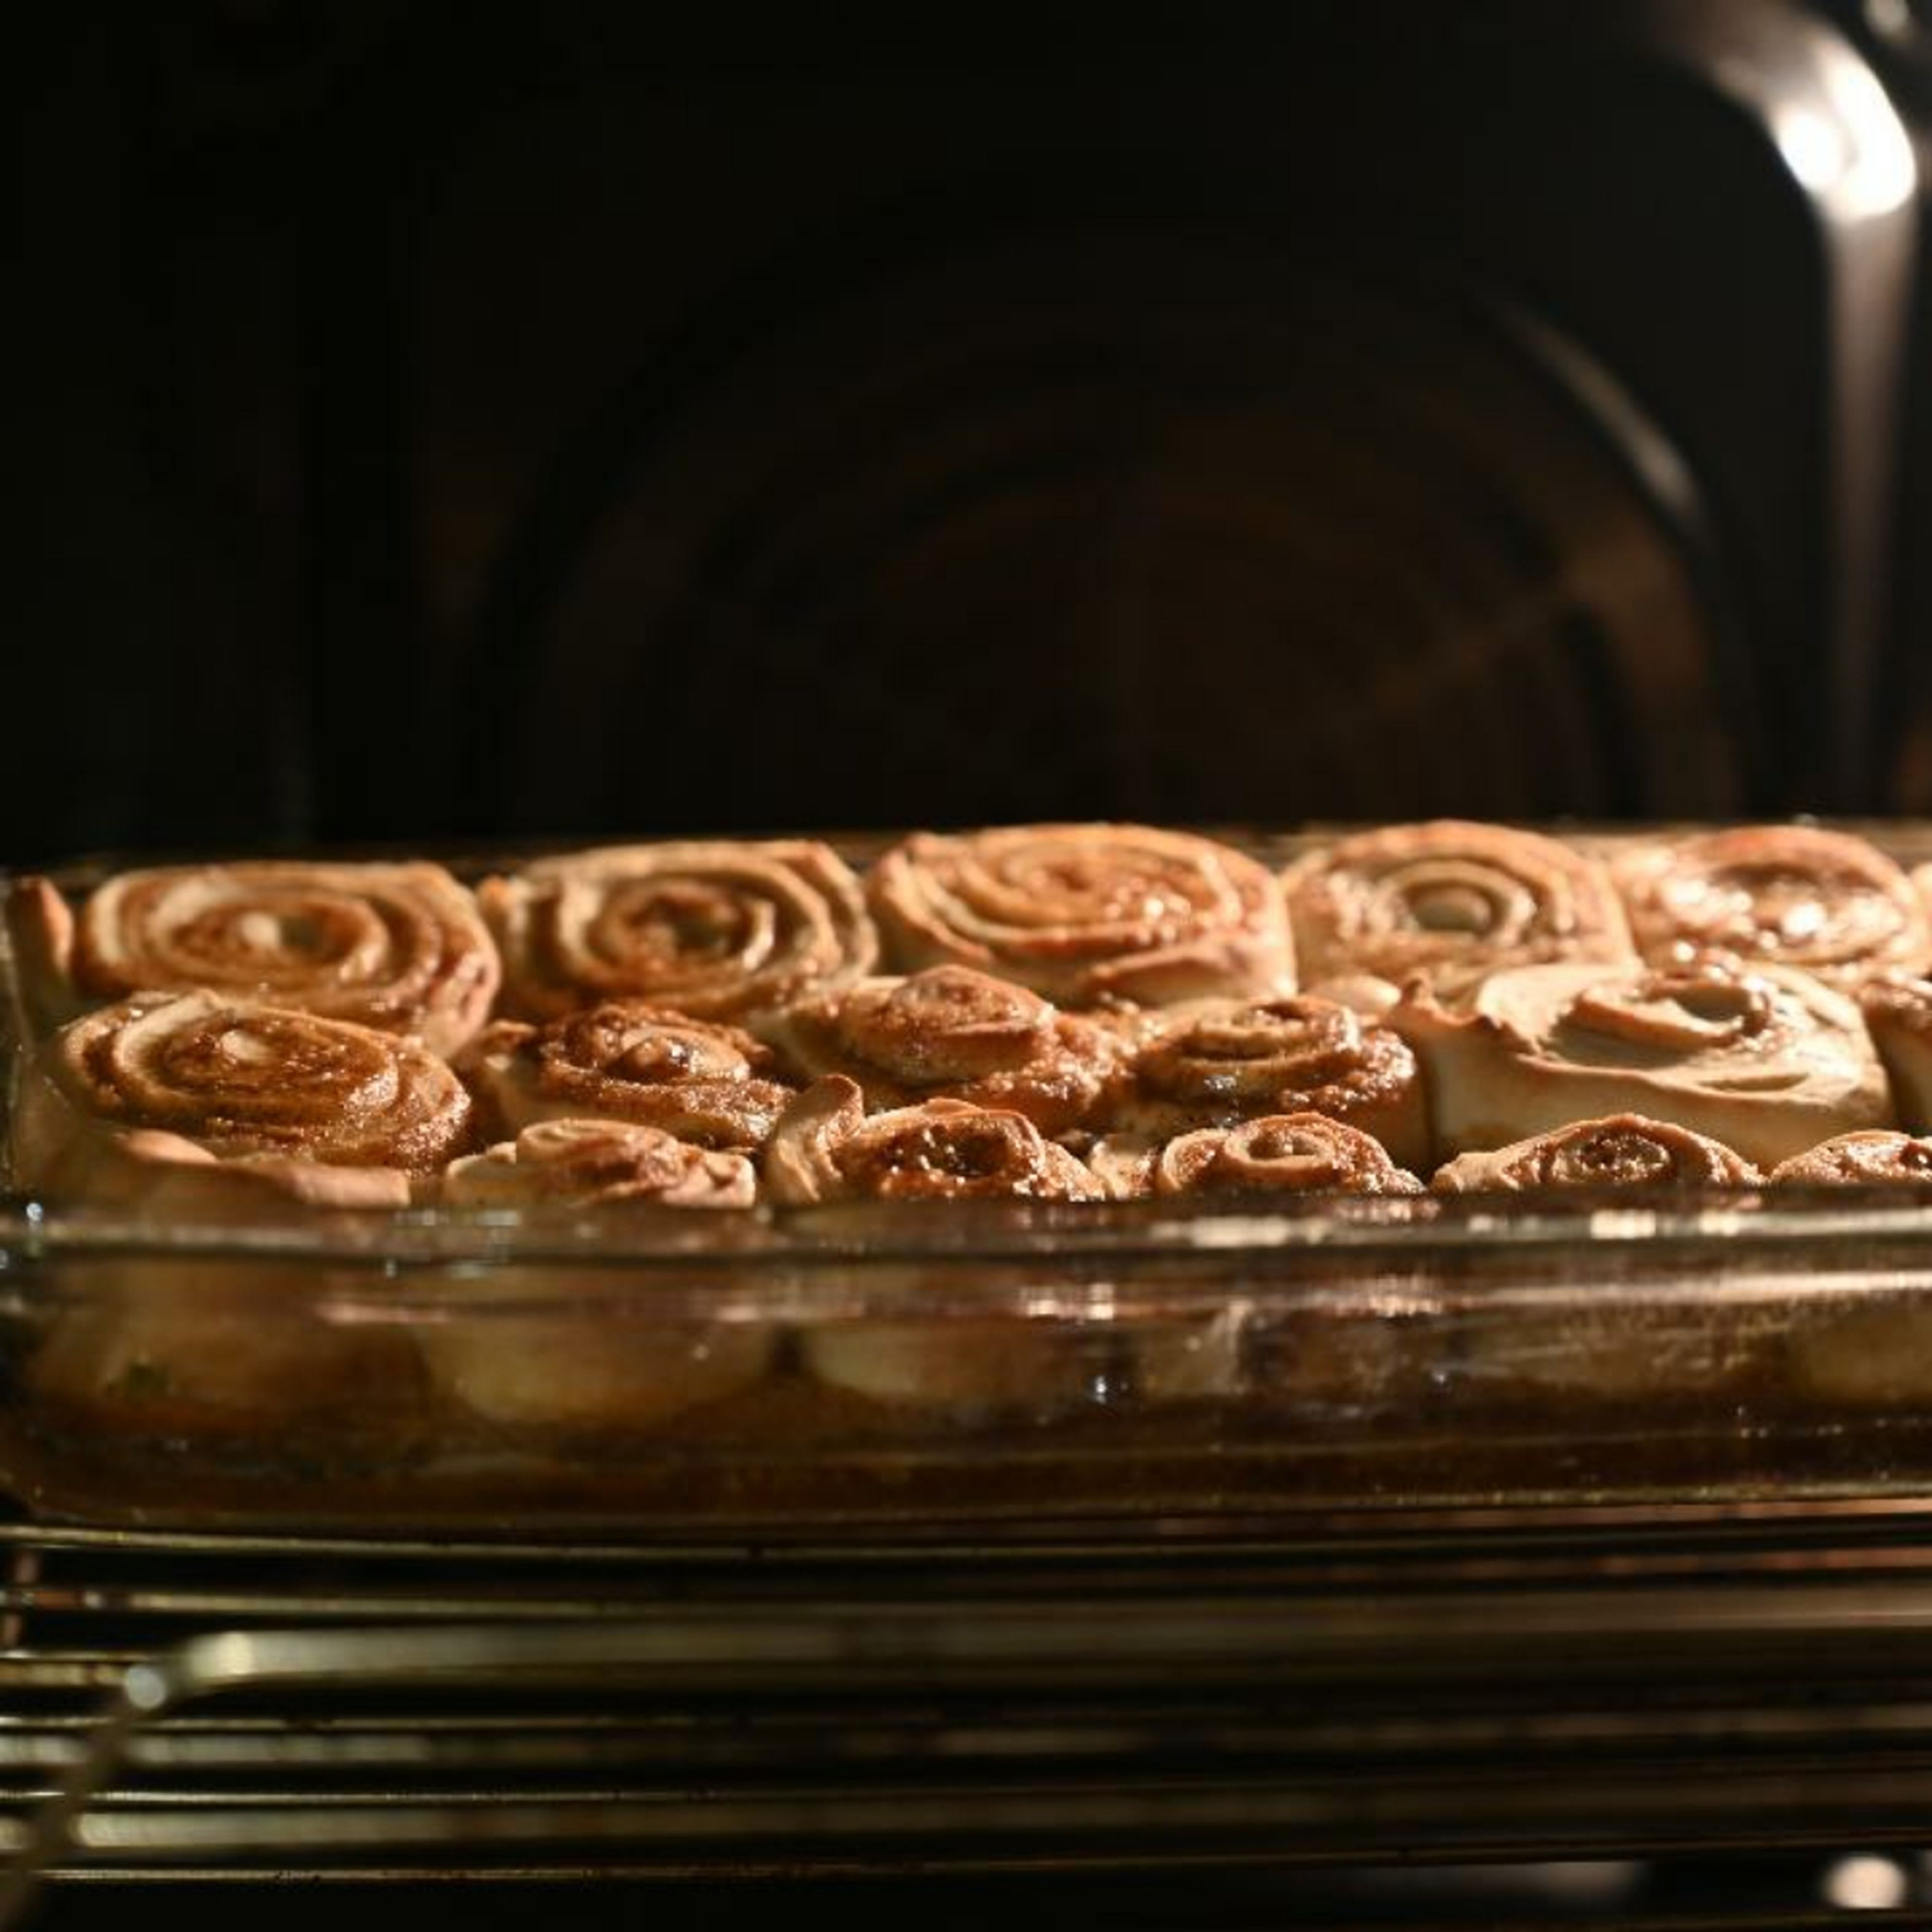 Bake the cinnamon rolls at 180°c C for 20-25 minutes.